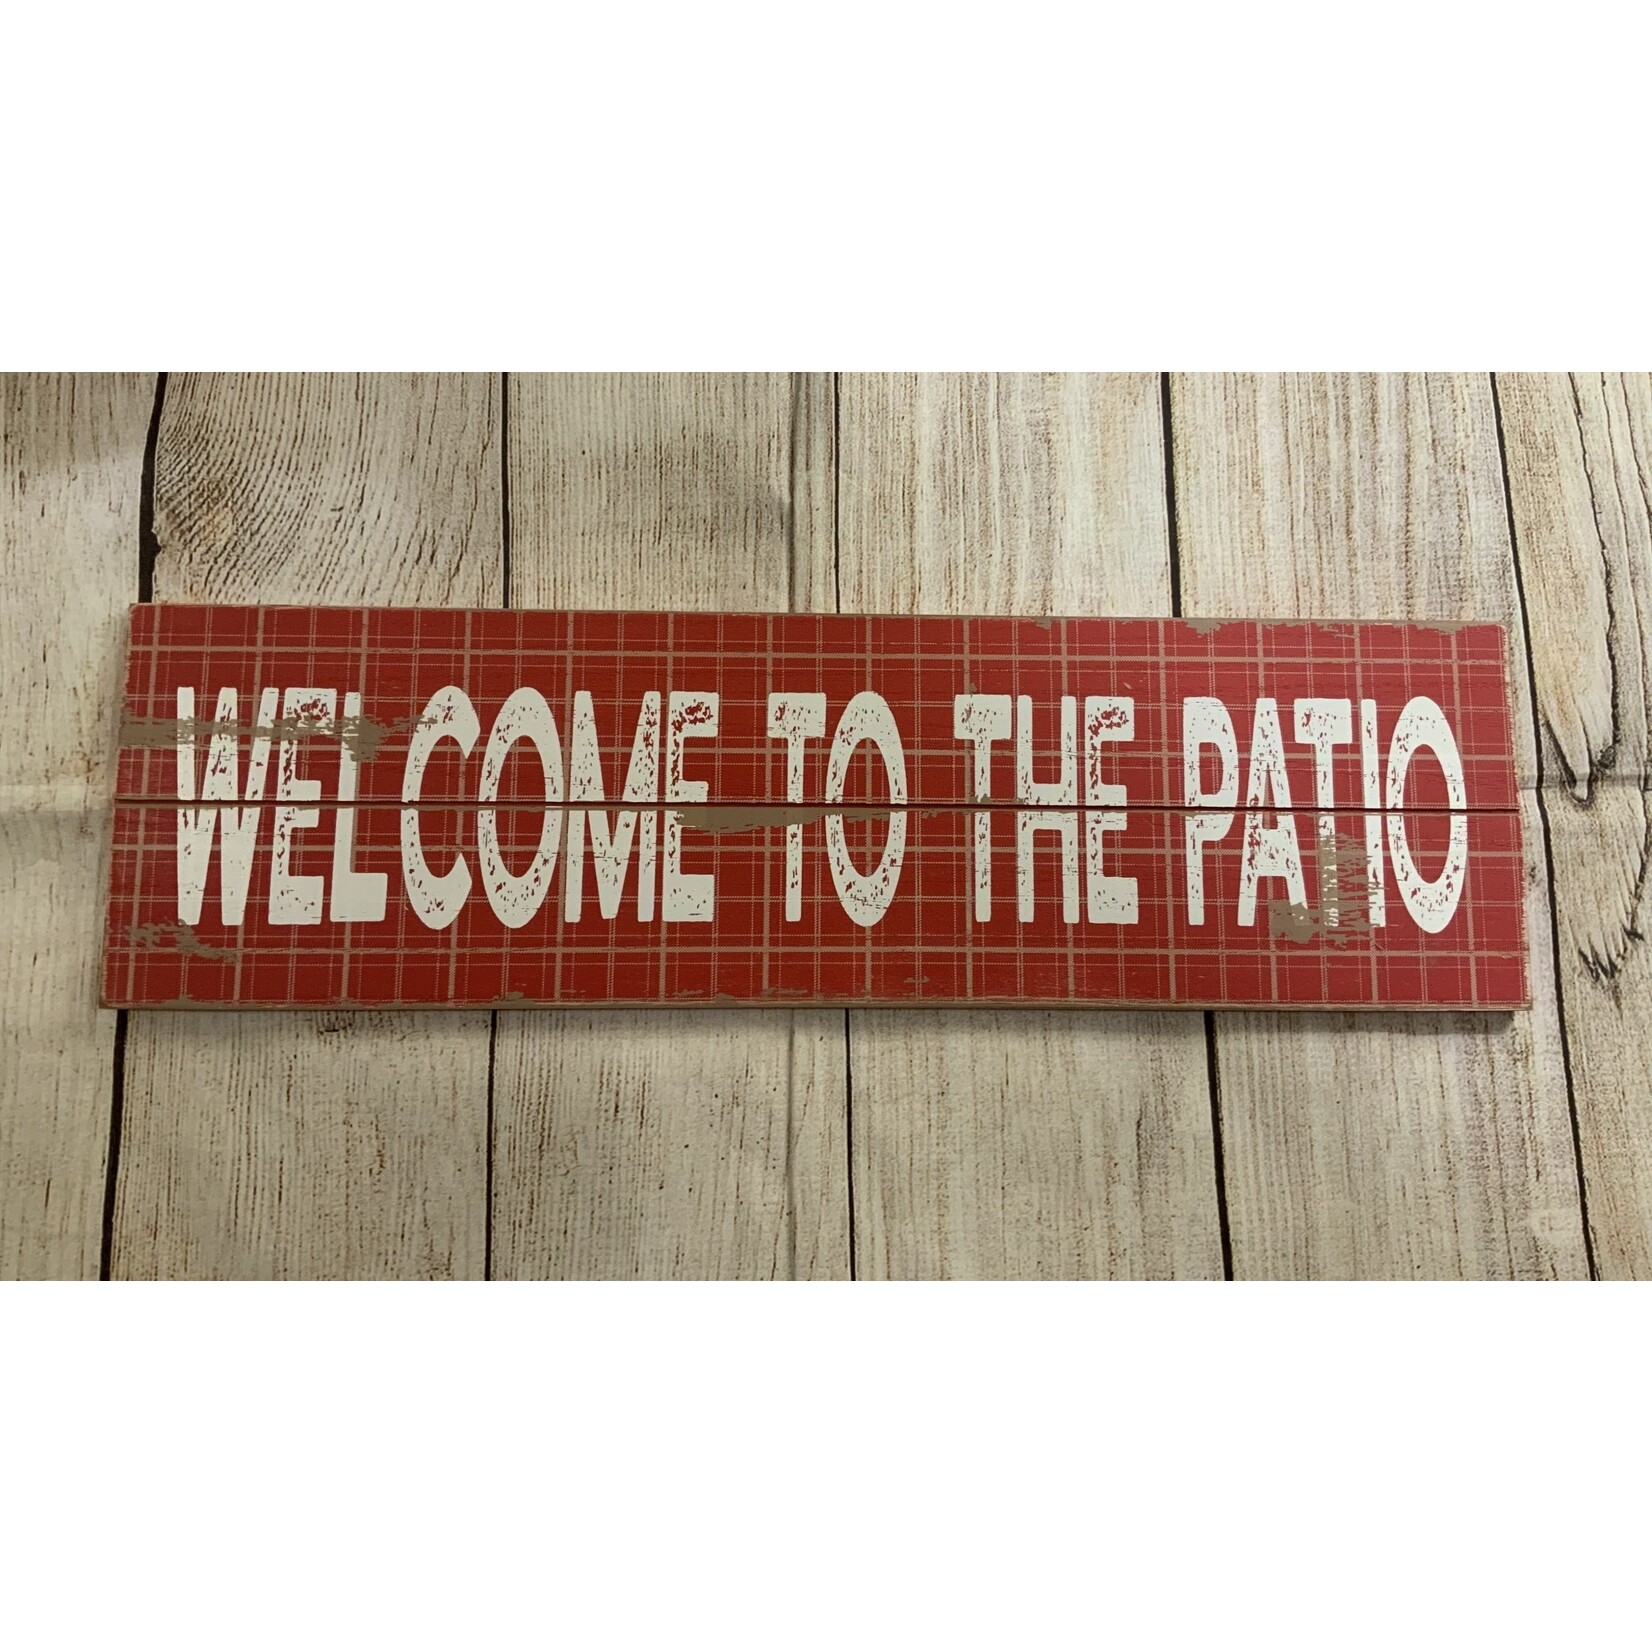 Transpac Welcome to the Porch/Deck/Patio Sign